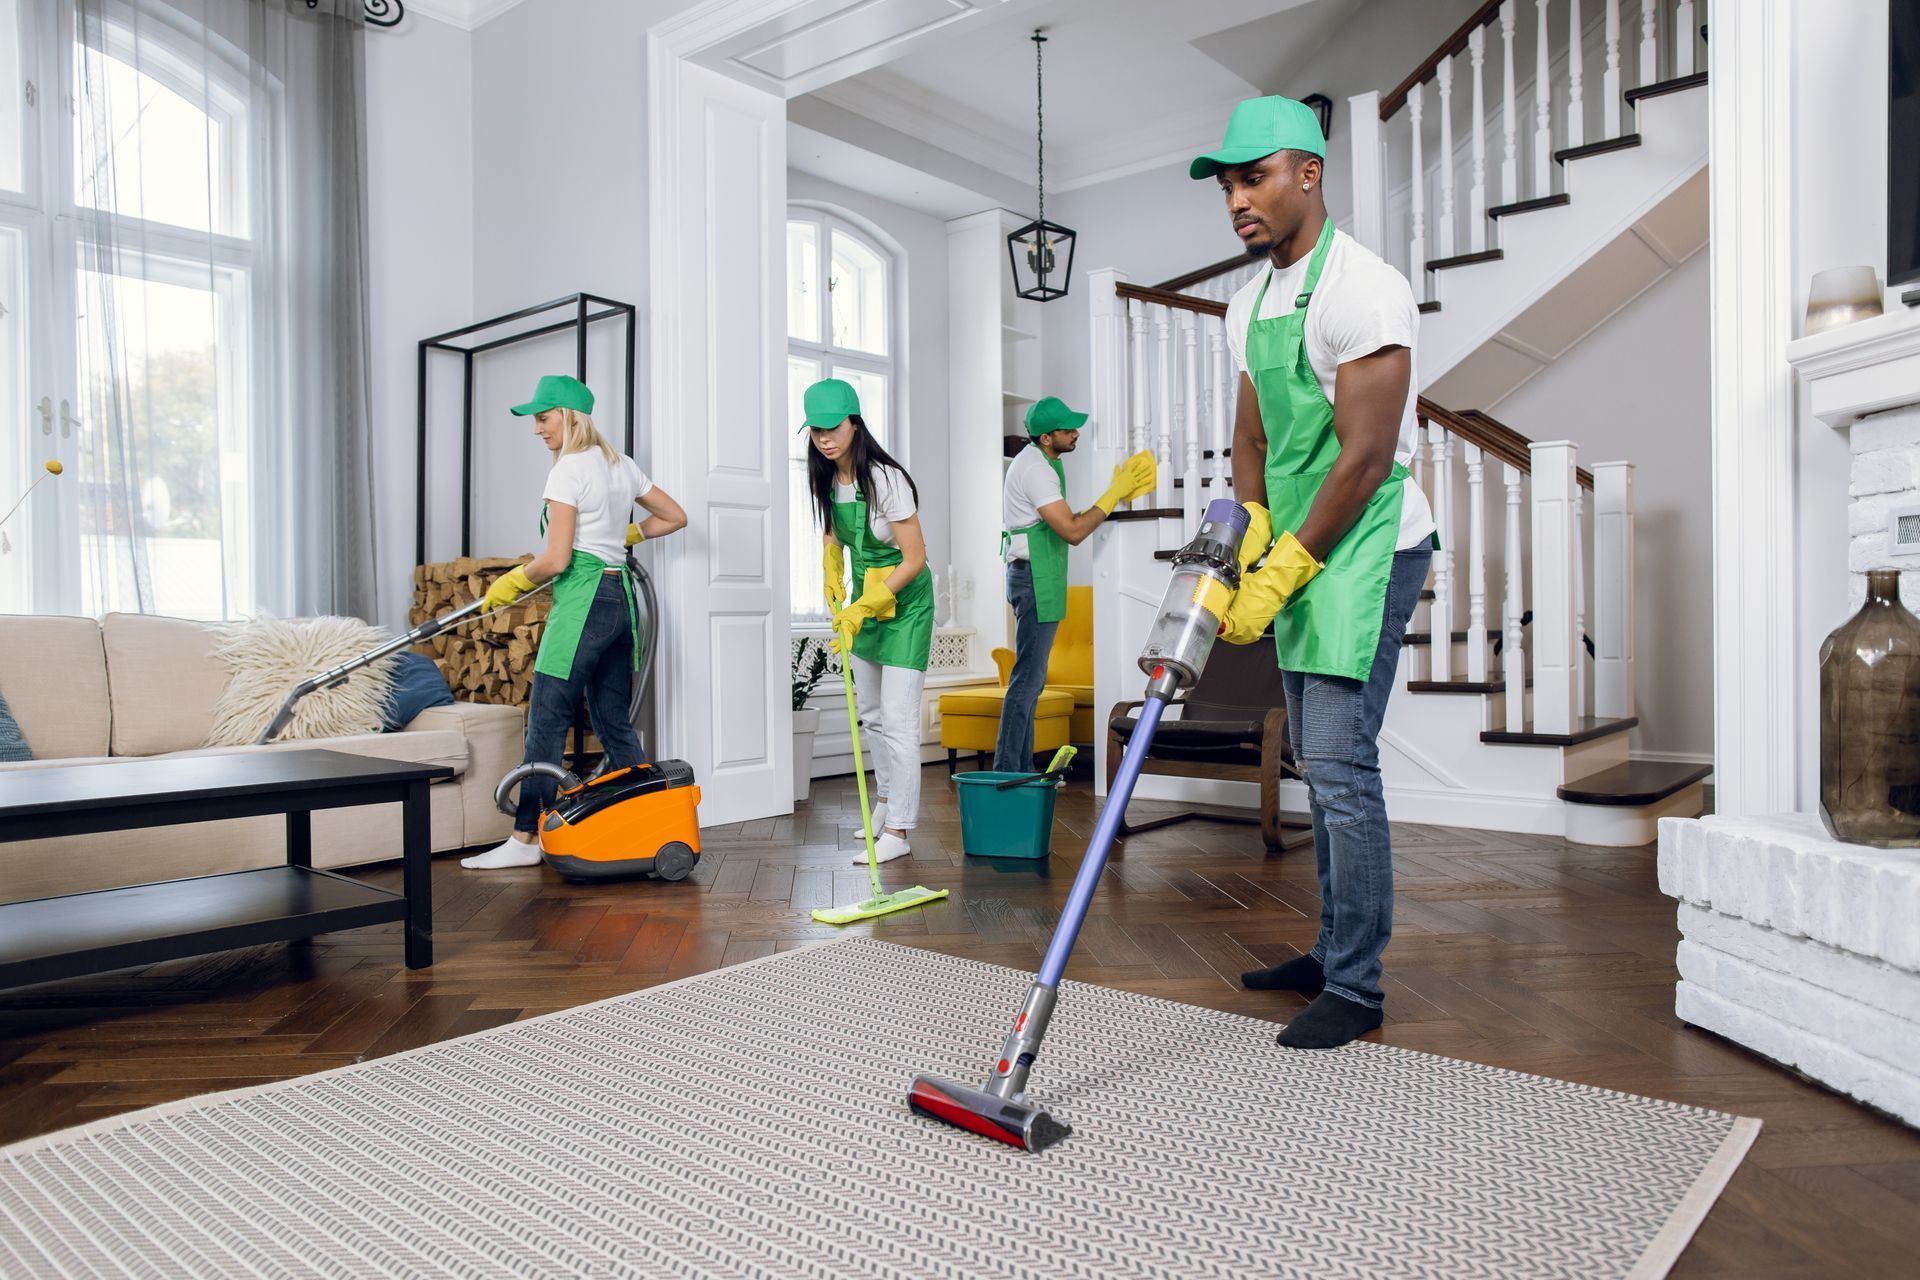 professional house cleaning team all hard at work in their uniforms cleaning different parts of the house at the same time.